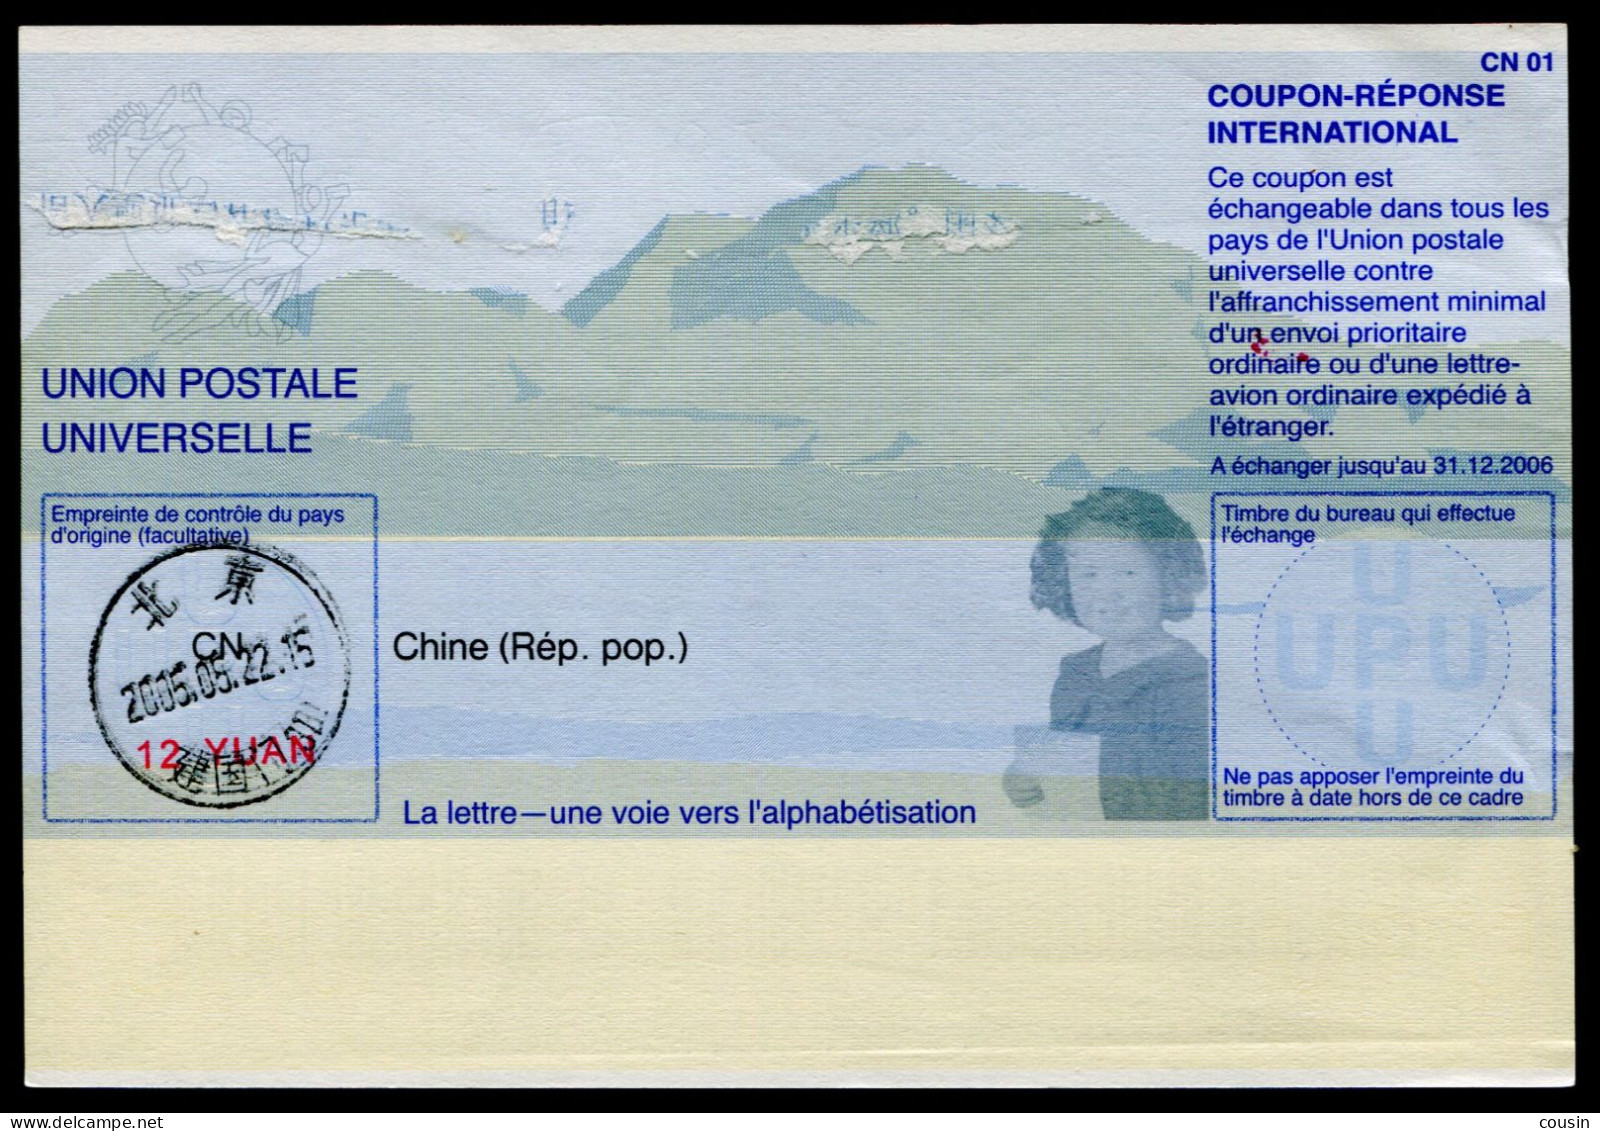 CHINE  International Reply Coupon / Coupon Réponse International - Covers & Documents